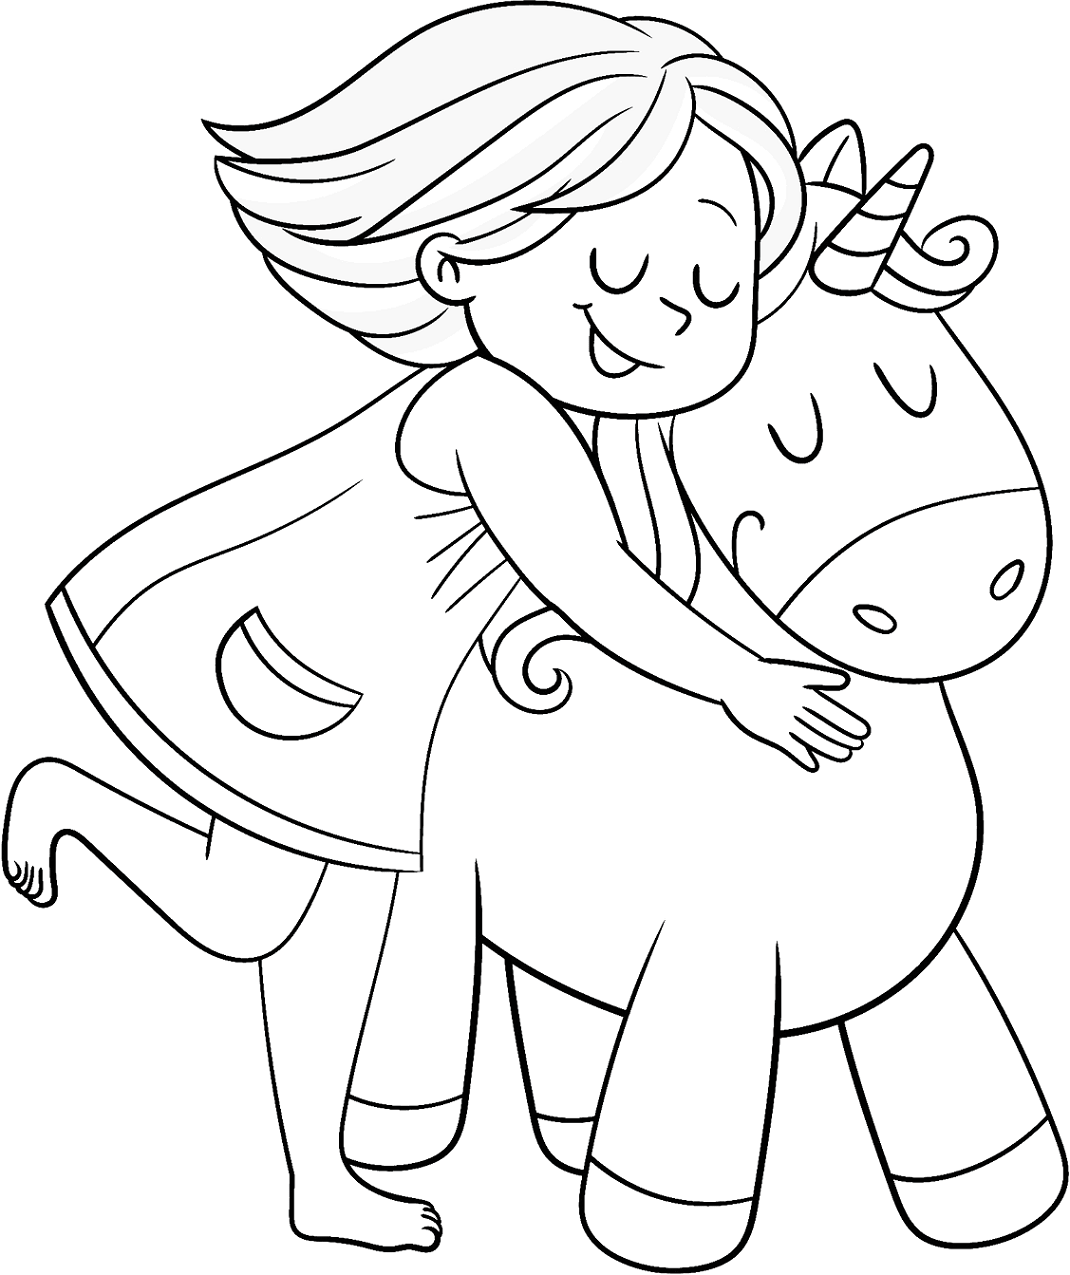 Girl With Unicorn Coloring Page